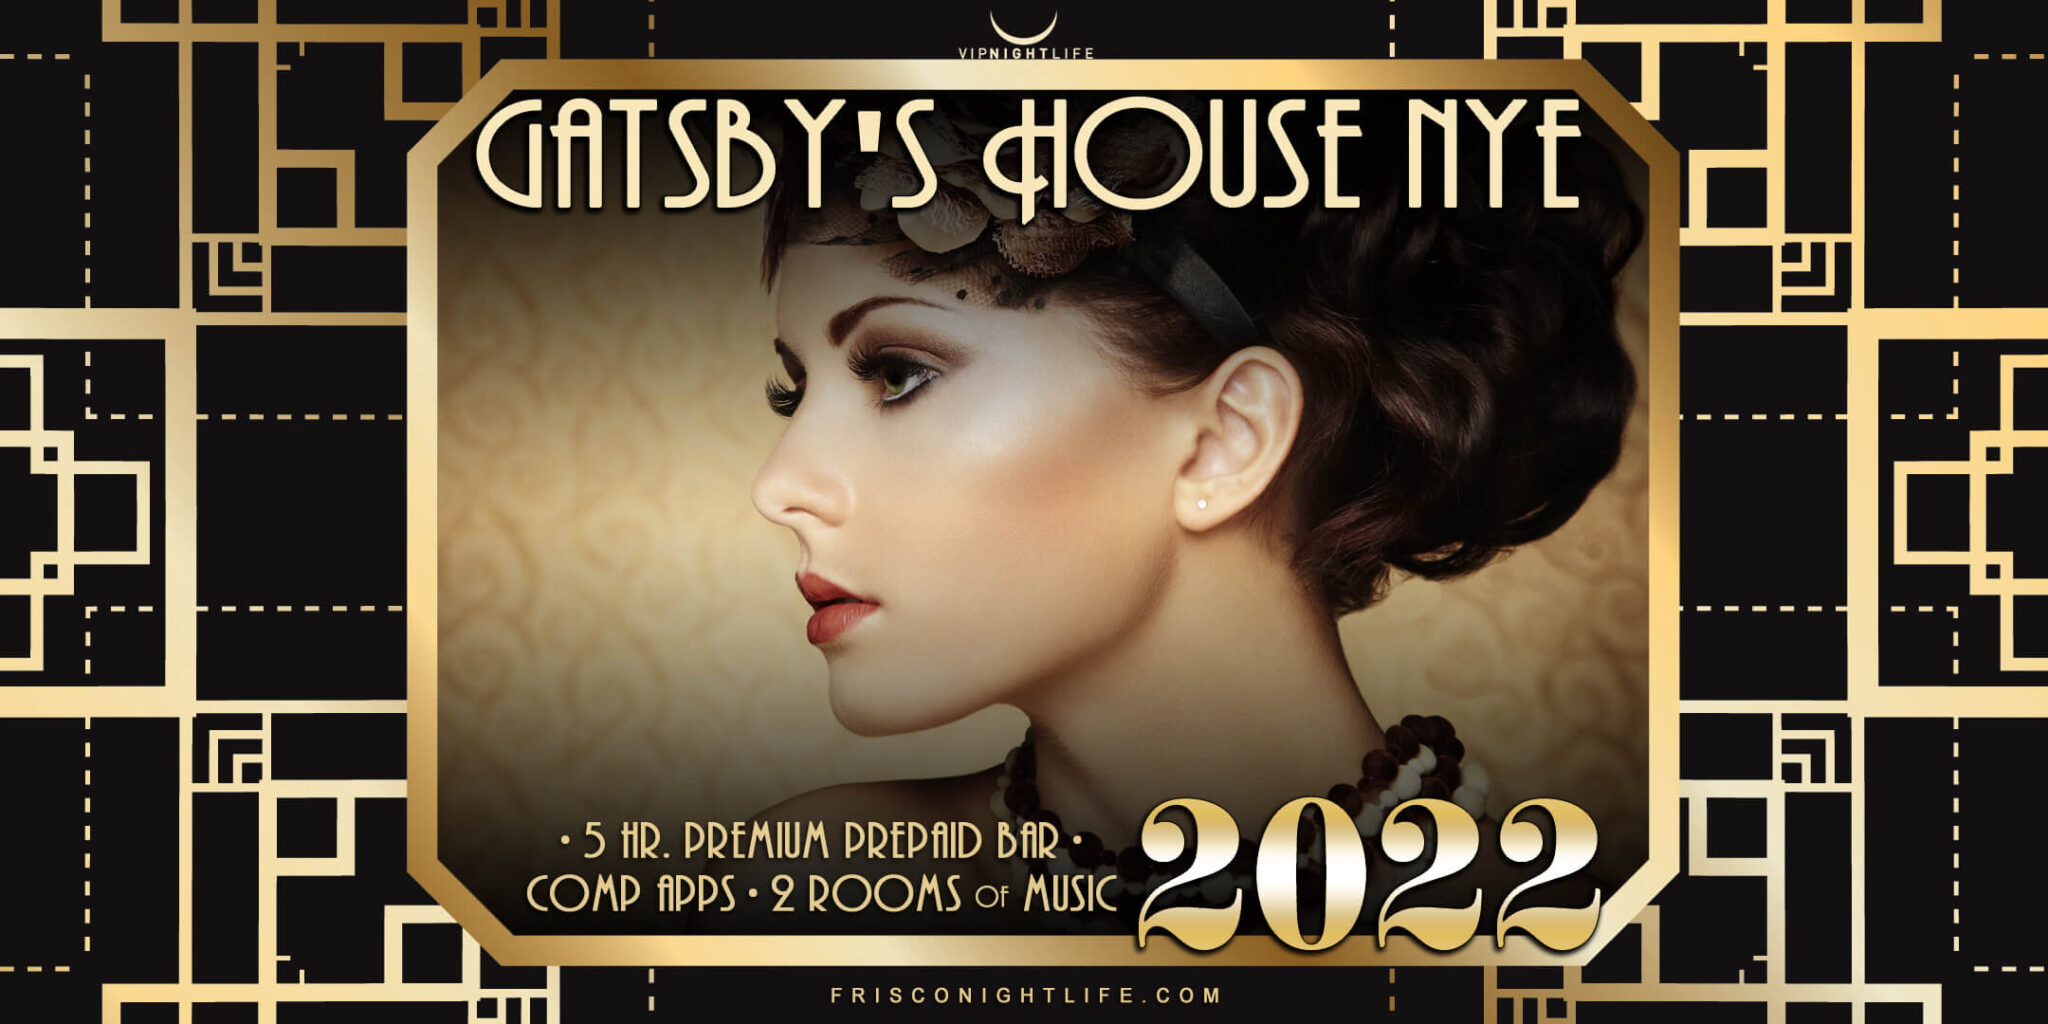 2022 Frisco Dallas New Year's Eve Party Gatsby's House VIP Nightlife